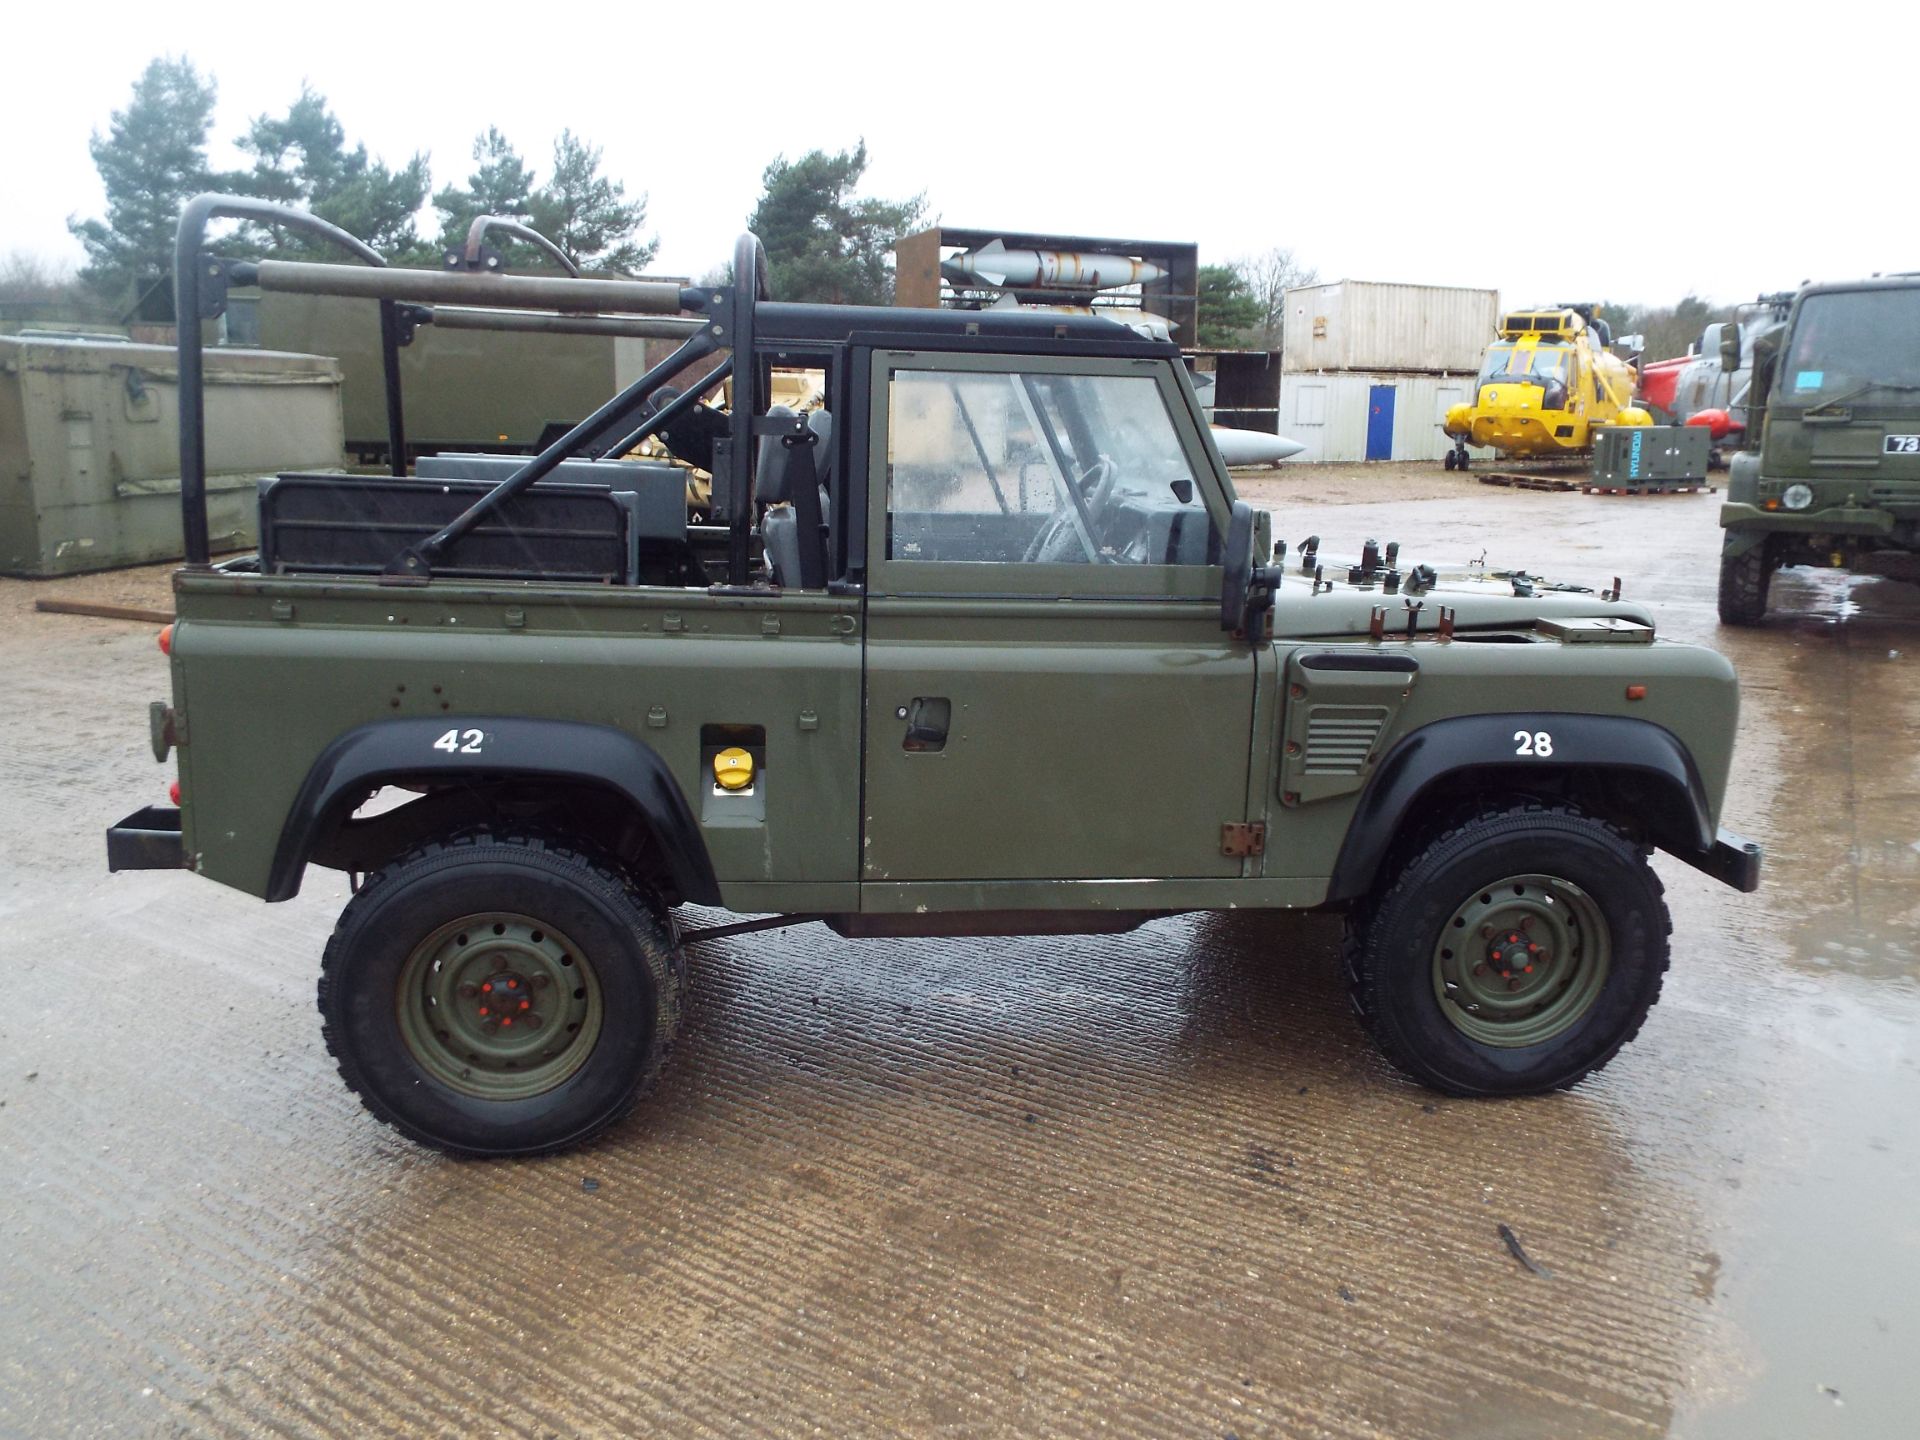 Military Specification Land Rover Wolf 90 Soft Top - Image 8 of 24